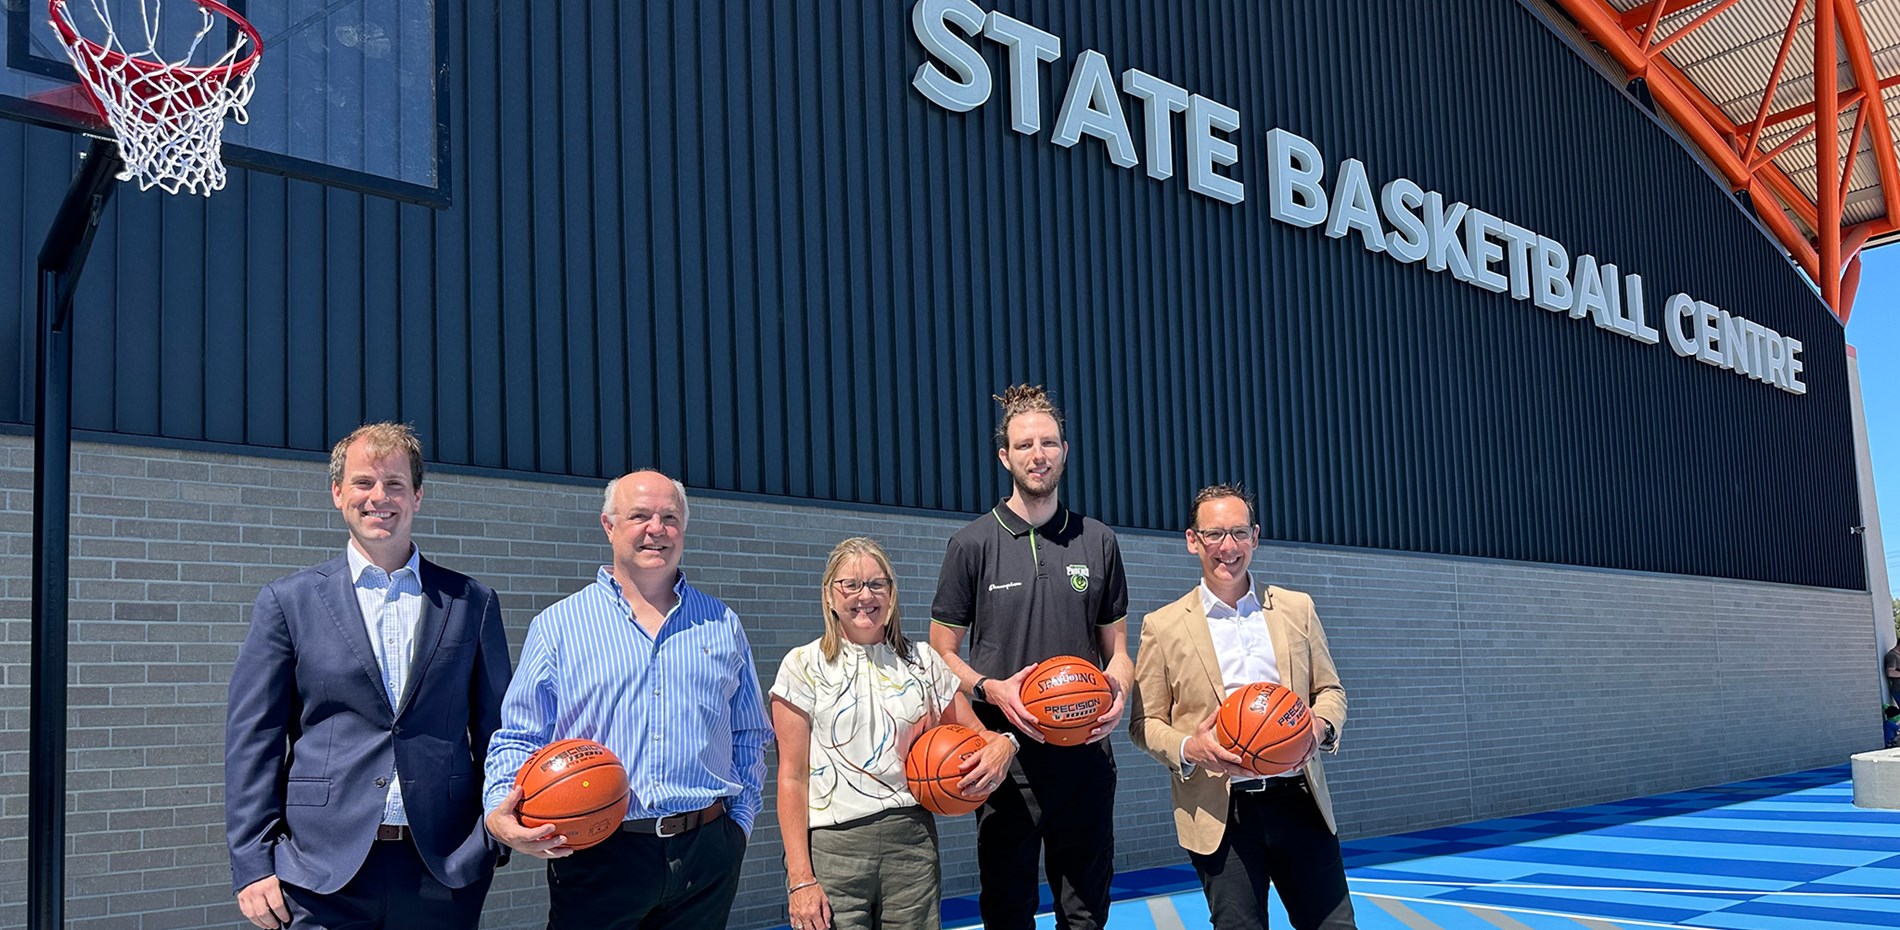 State Basketball Centre A Win For Players, Fans And Jobs Main Image